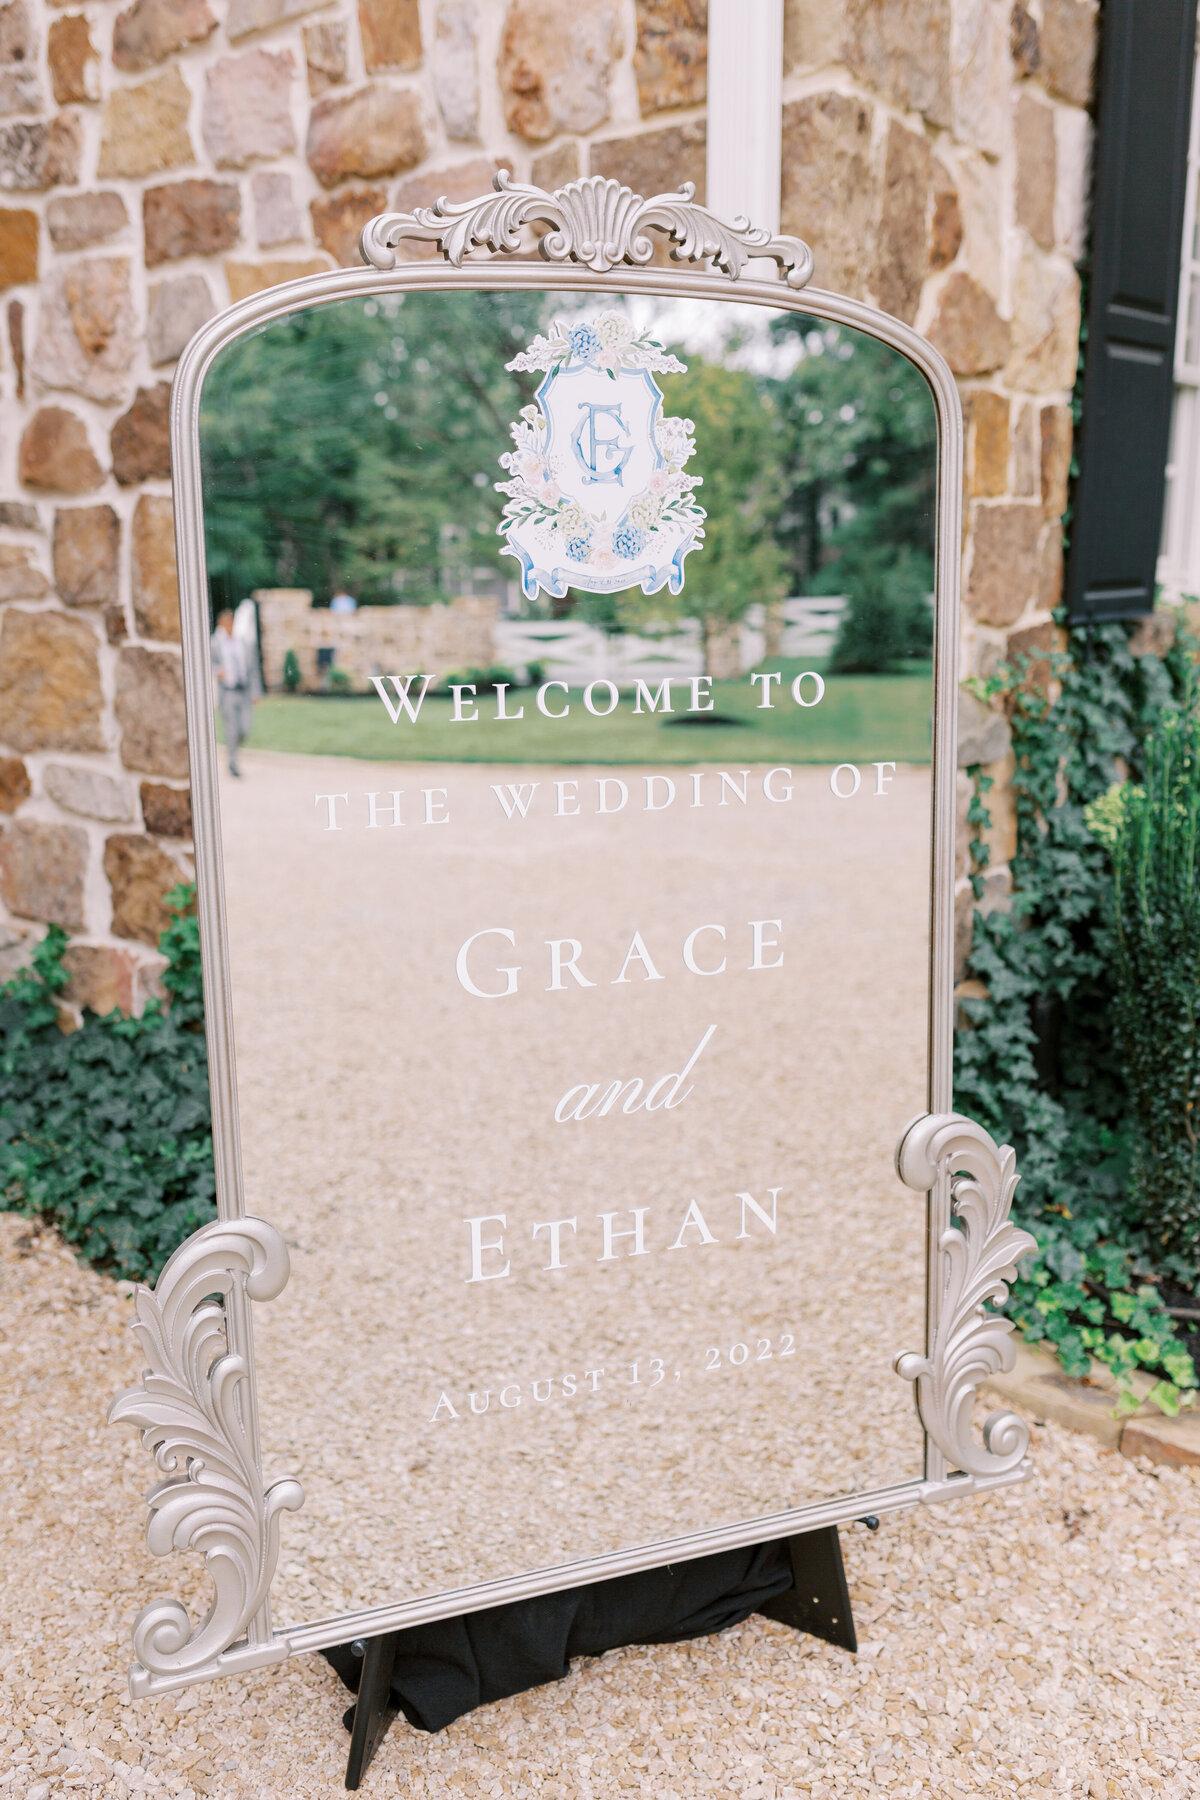 Antique Mirror welcome sign for wedding cremony